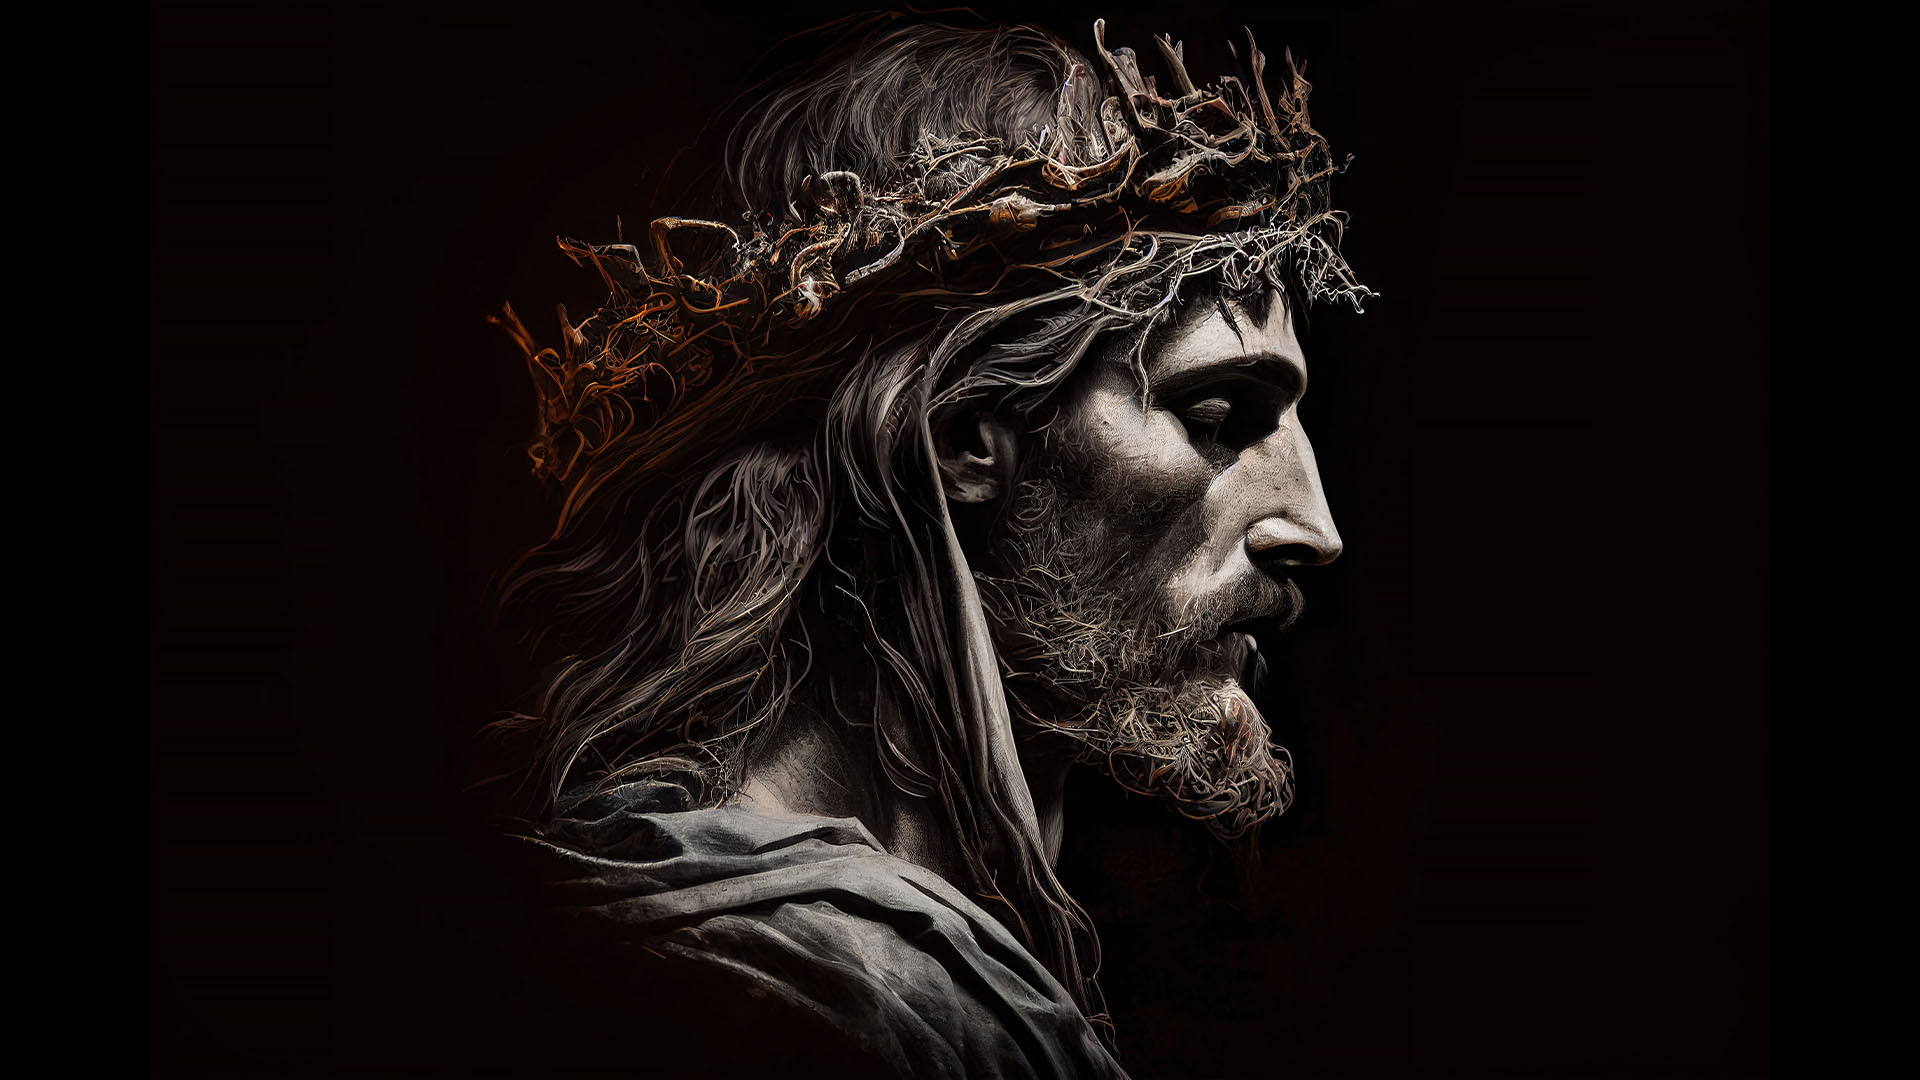 Artist's depiction of Jesus Christ wearing a crown of thorns